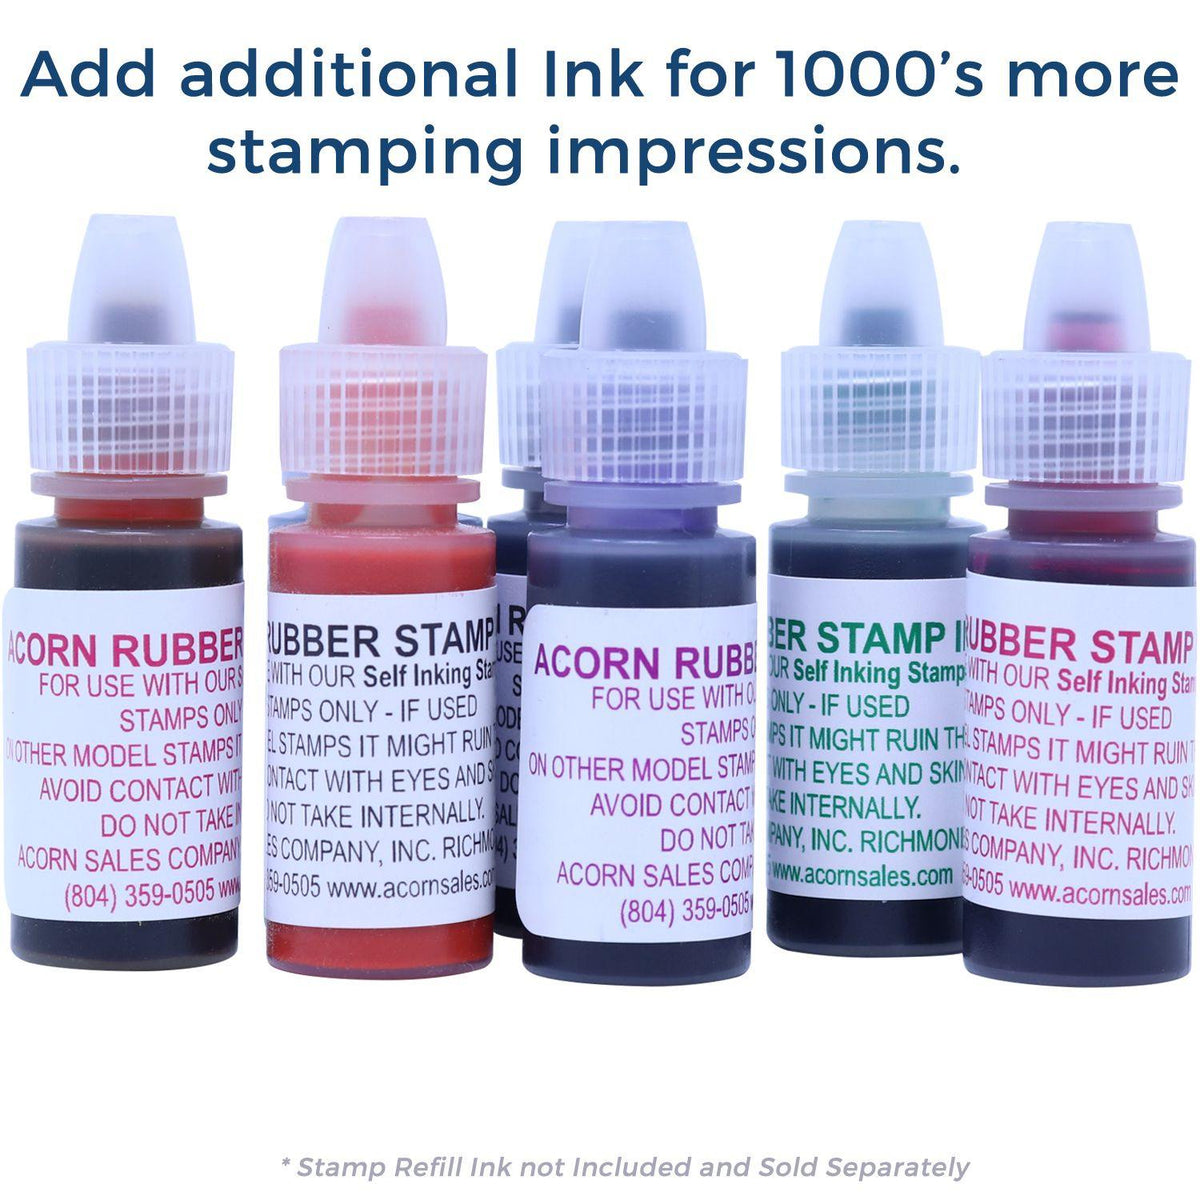 Refill Inks for Large Pre-Inked Scanned with Line Stamp Available